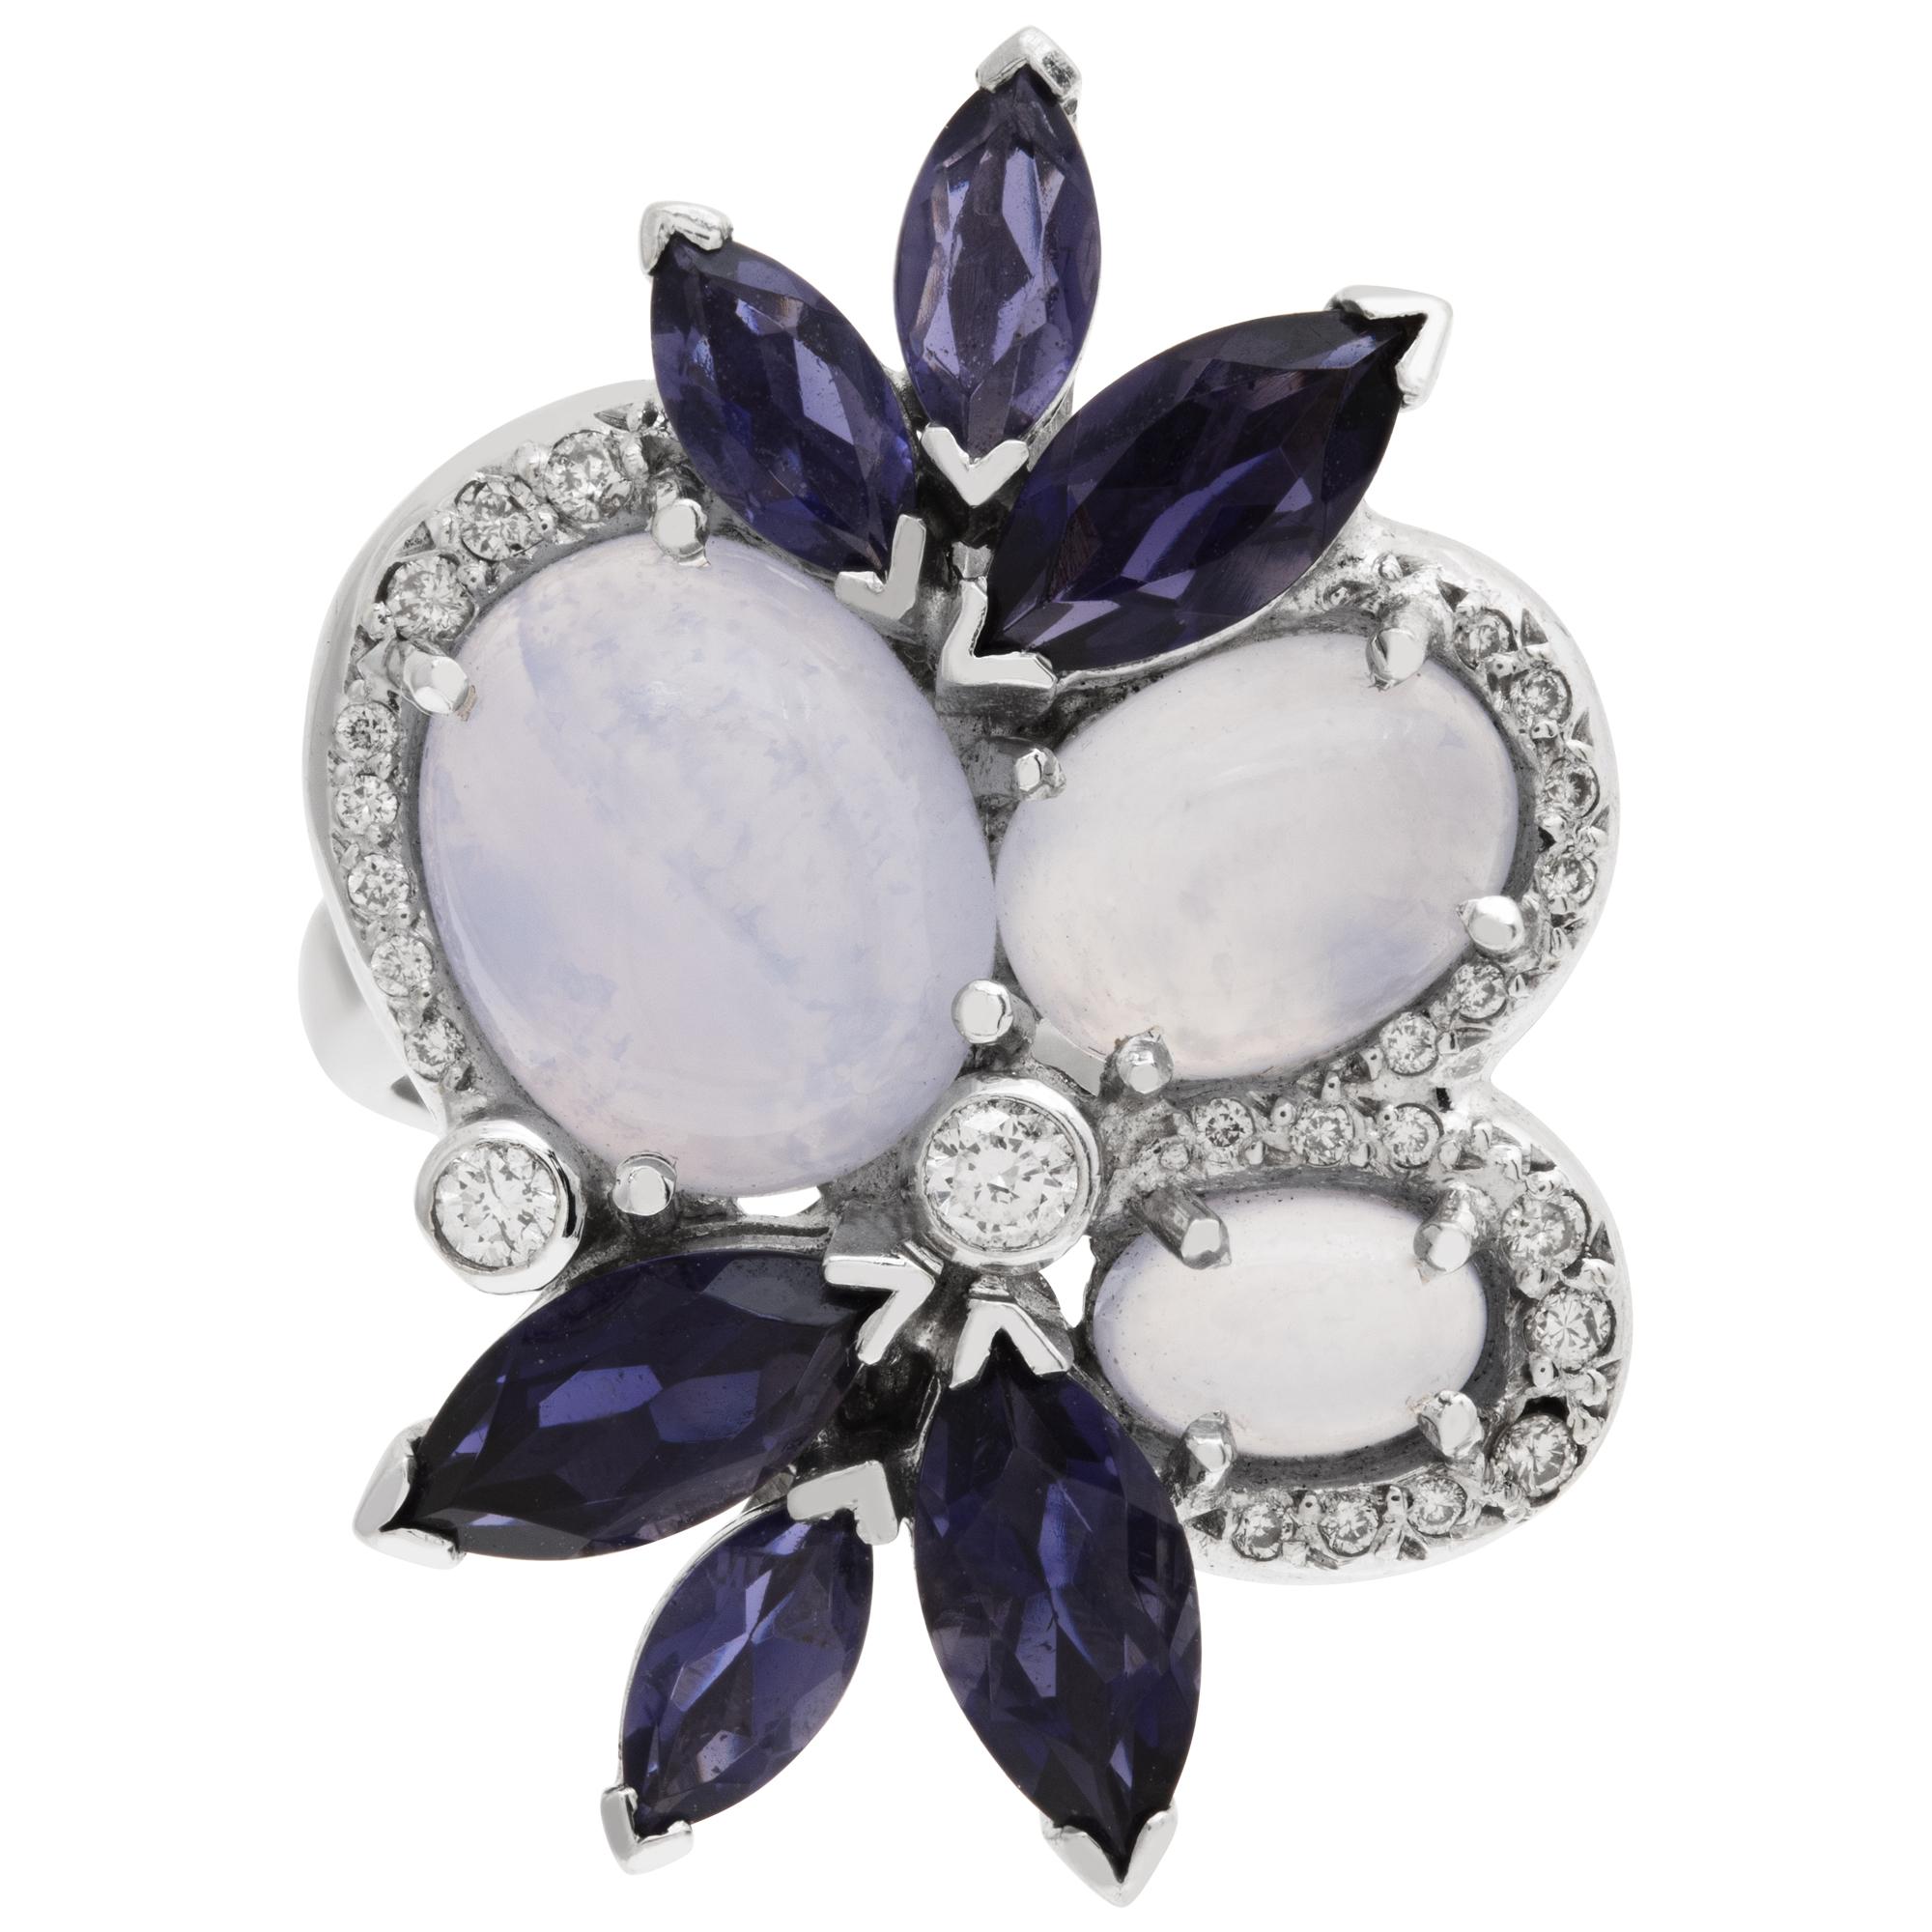 Flower shape tanzanite and diamond ring in 18k white gold. size 6This Sapphire ring is currently size 6 and some items can be sized up or down, please ask! It weighs 6.5 pennyweights and is 18k White Gold.
